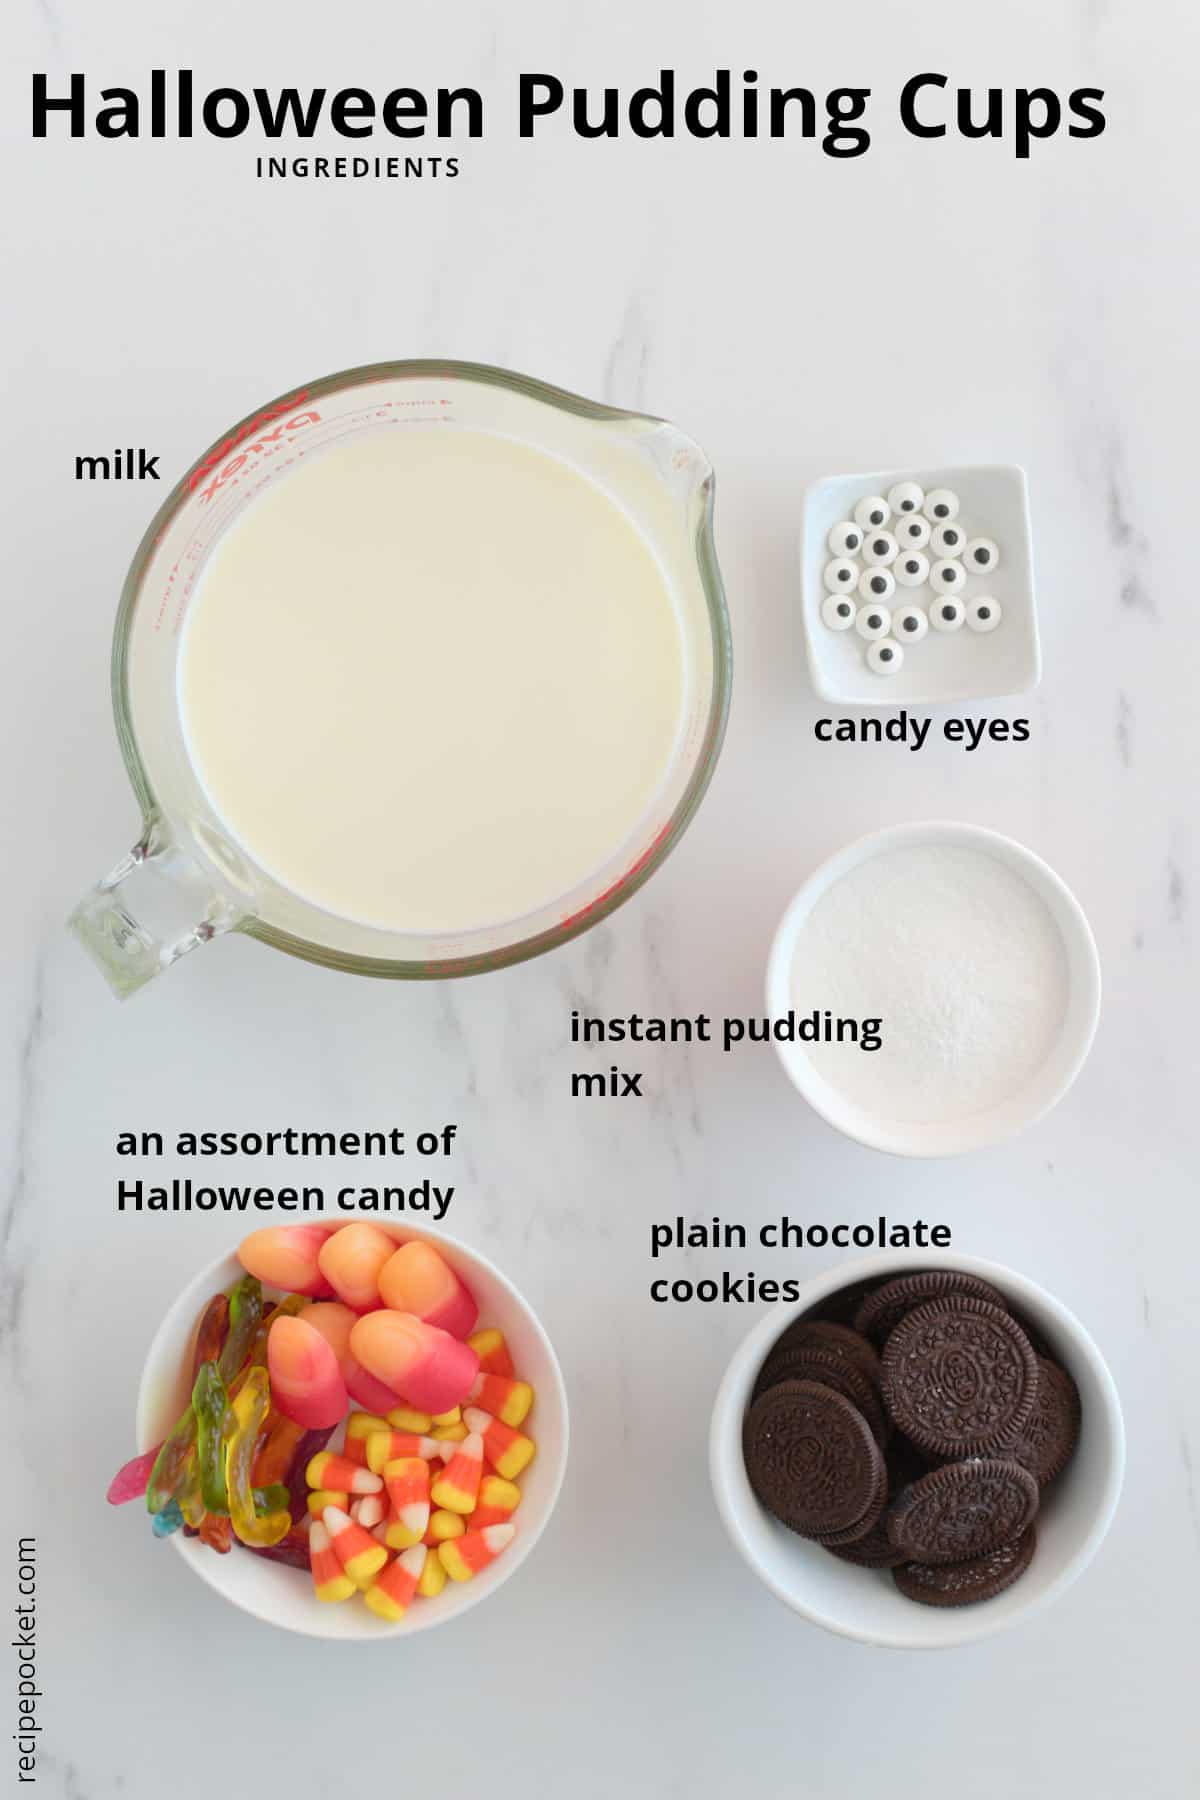 Image of ingredients needed to make Halloween pudding cups.